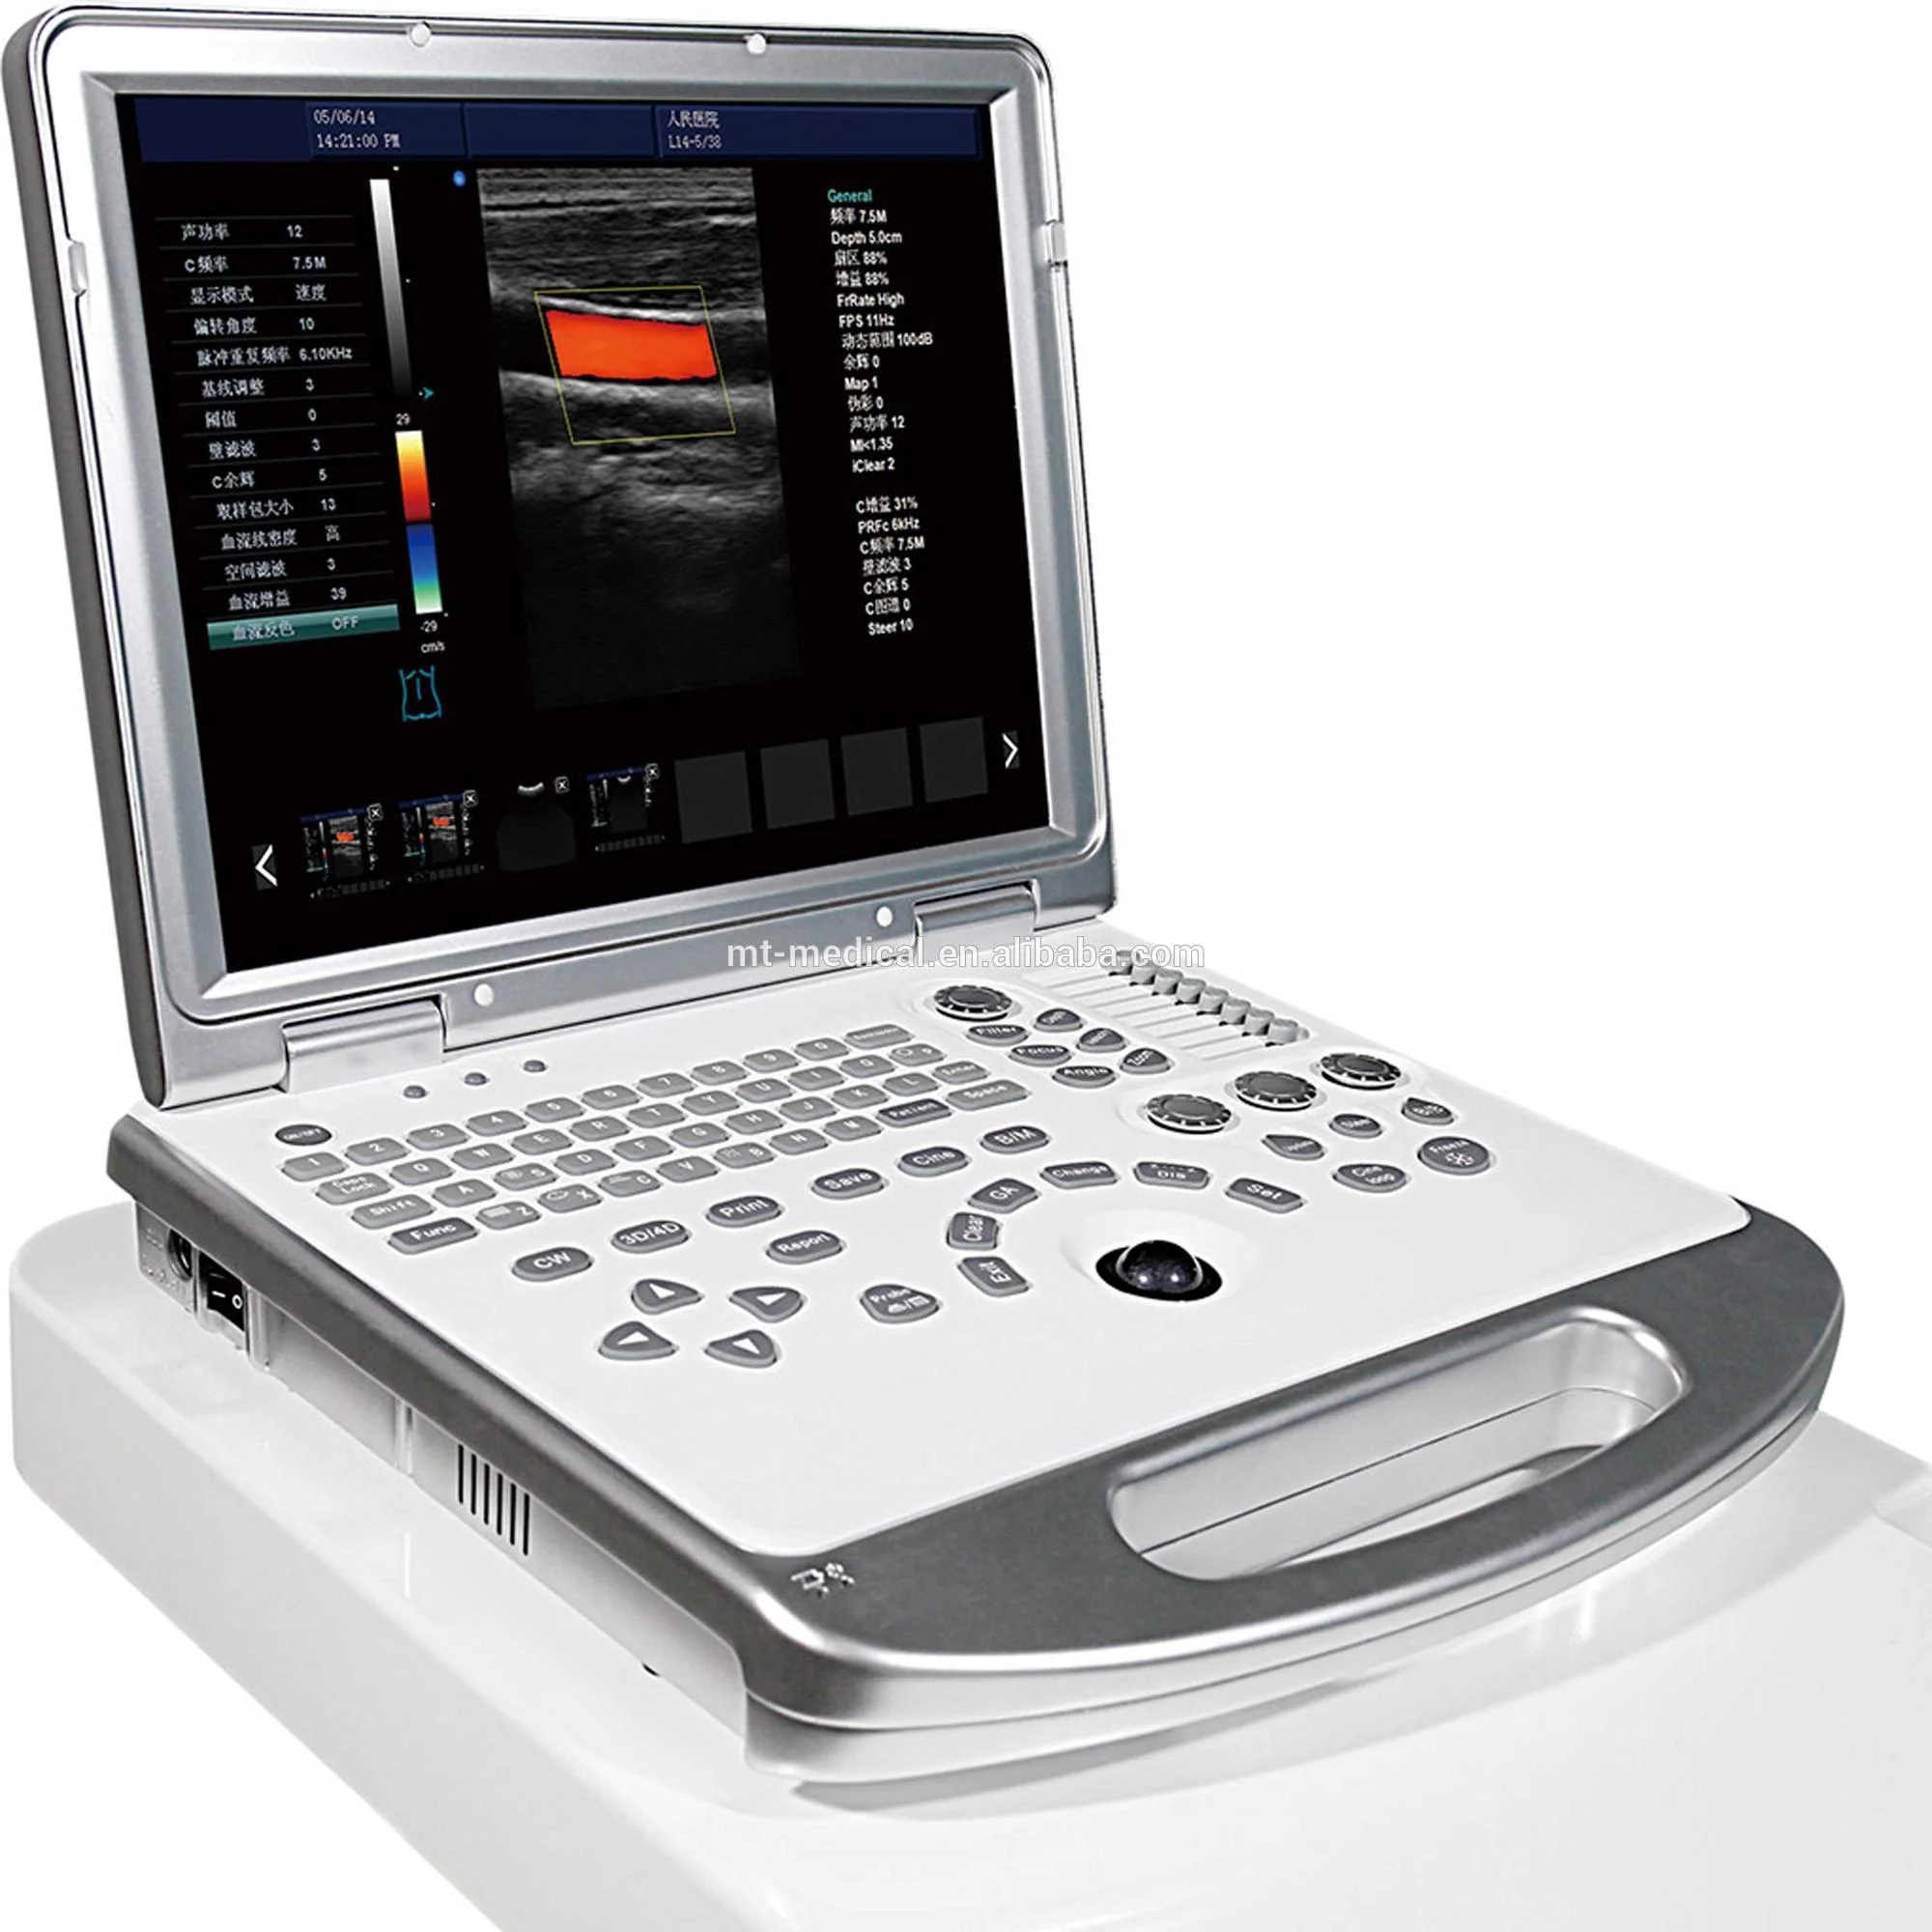 

Hot sales 4D color laptop doppler 128 elements portable ultrasound scanner machine with Real time 3D/4D, with CW